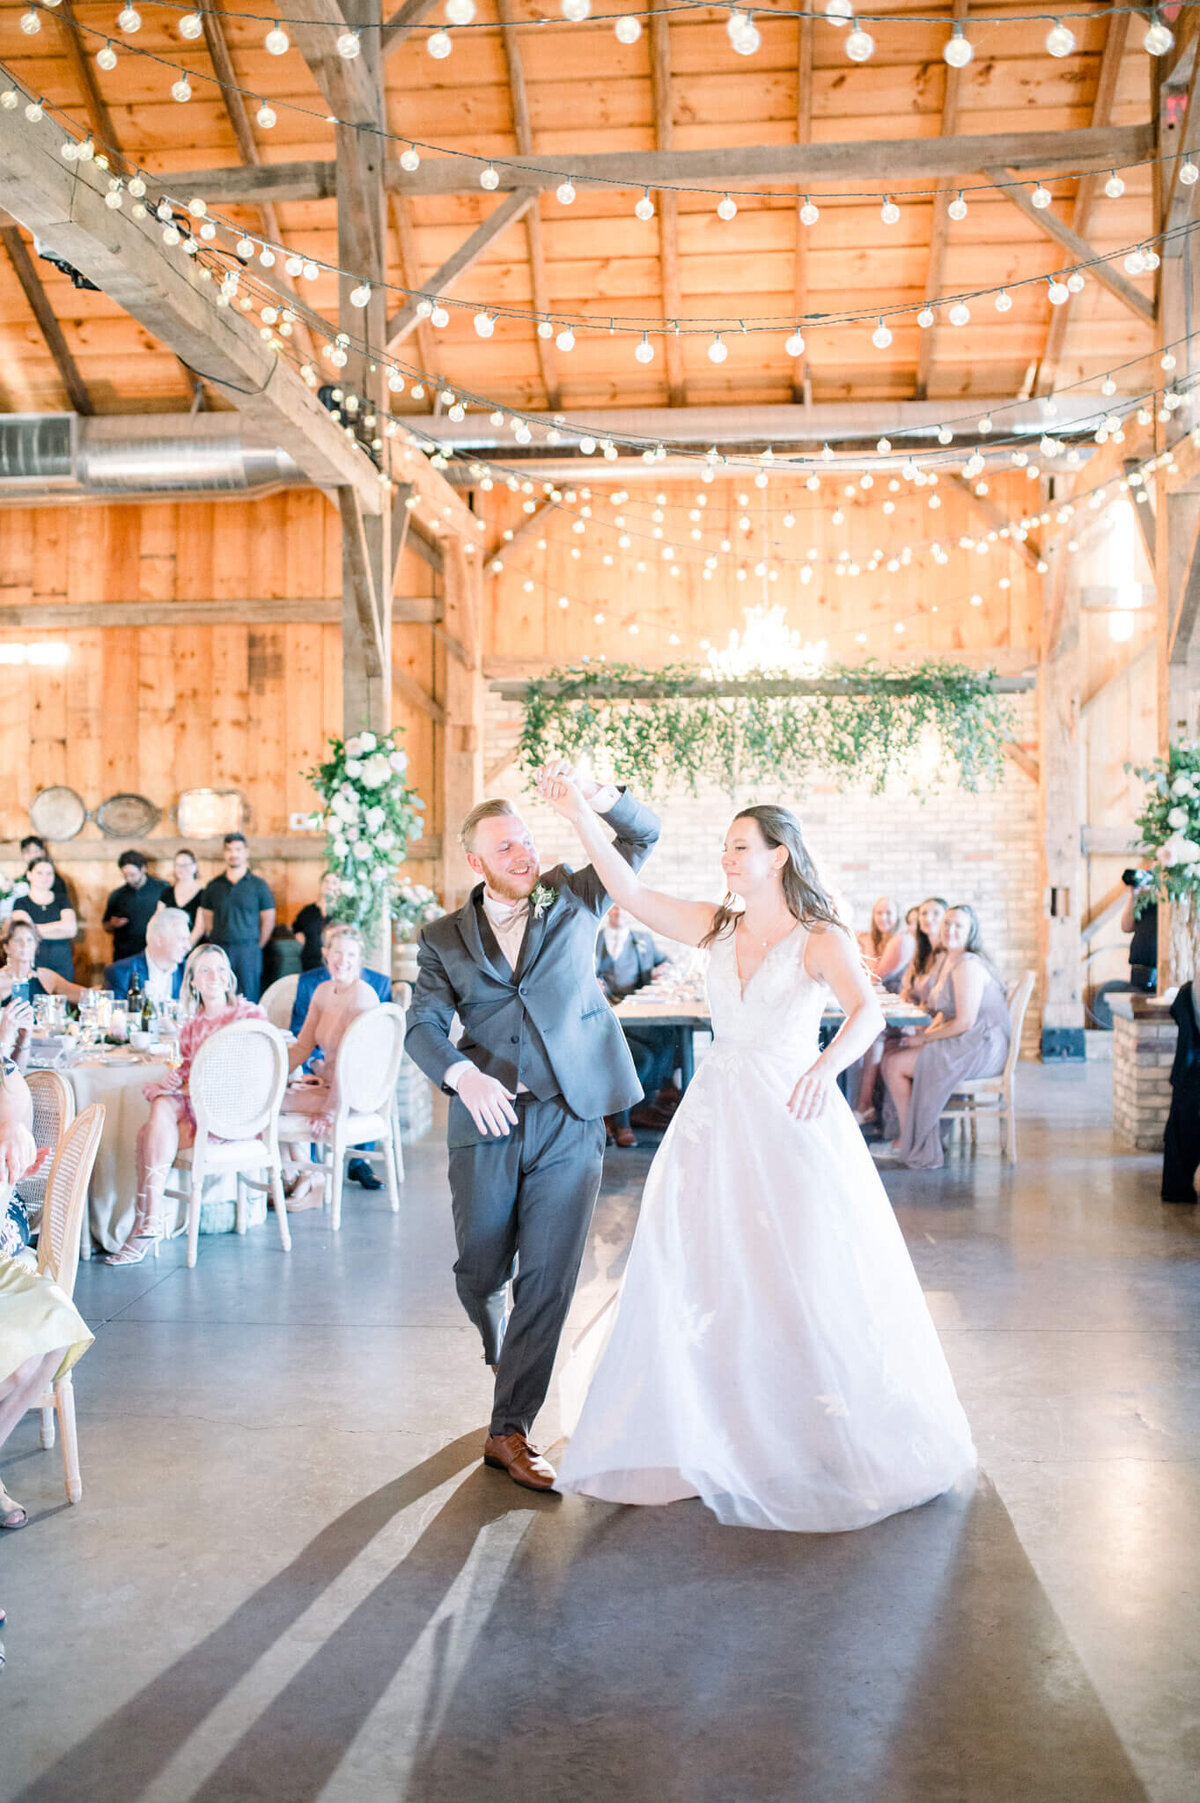 Bride and groom enter the barn to their reception